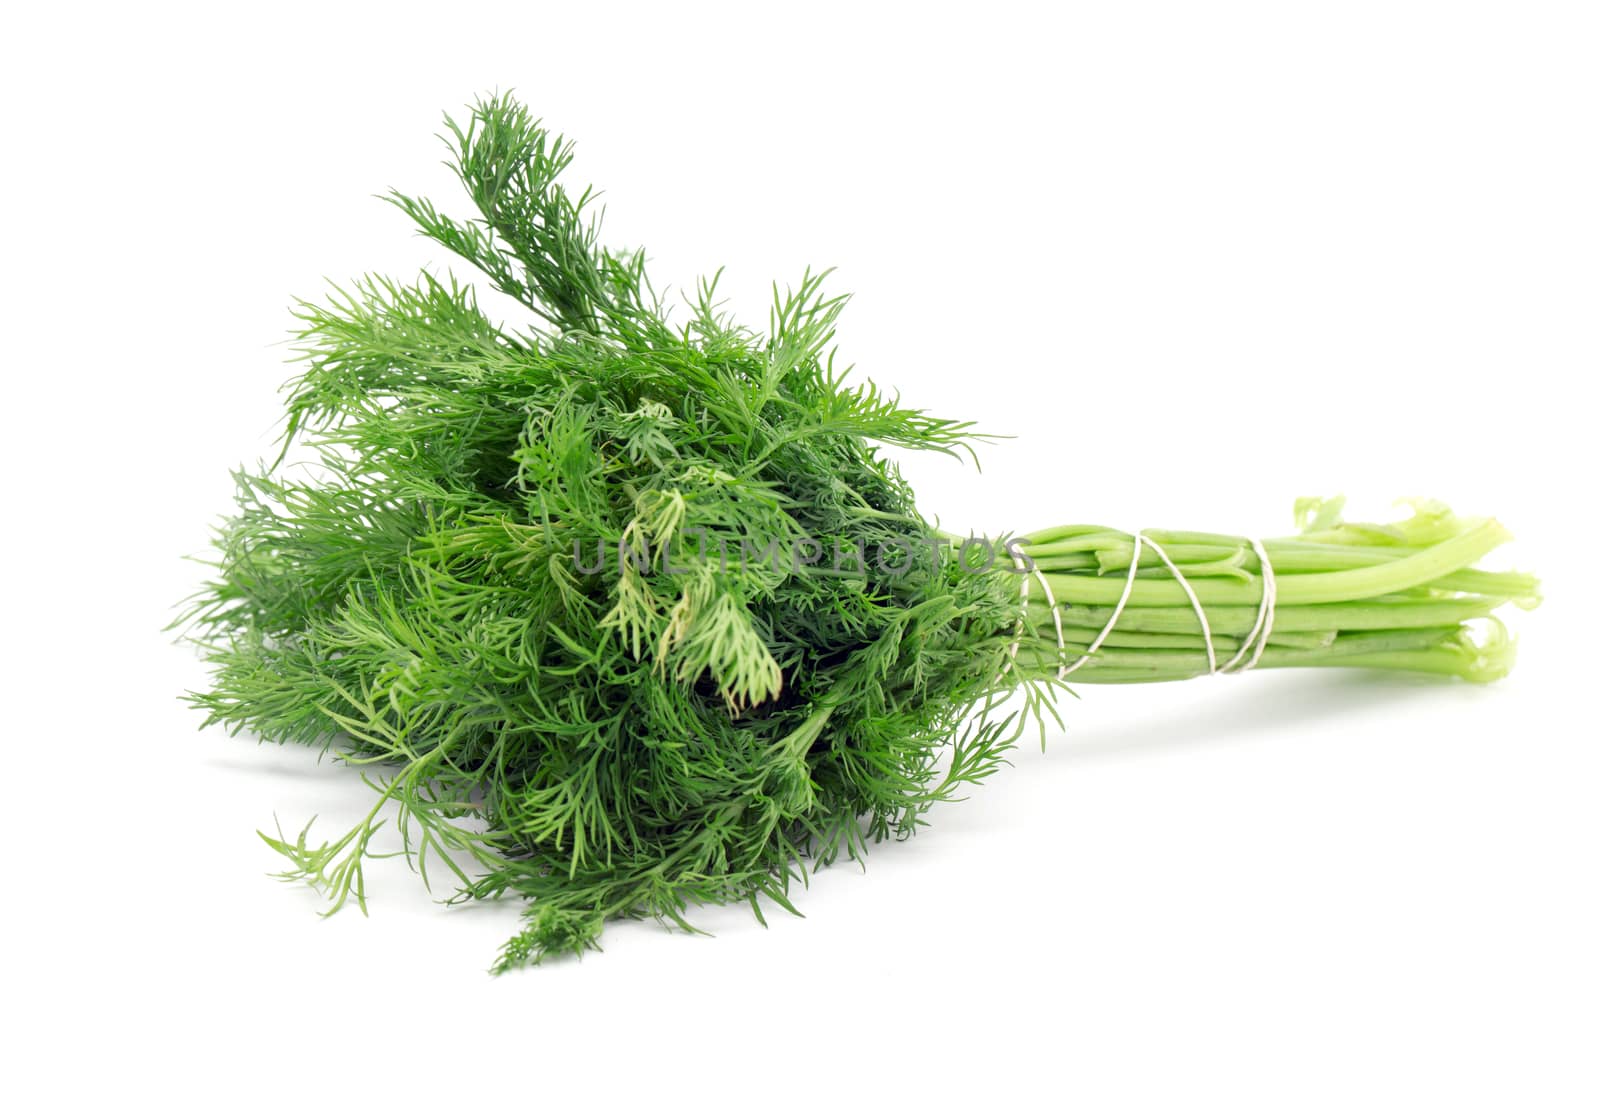 Bunch of fresh dill. Isolated on white background.